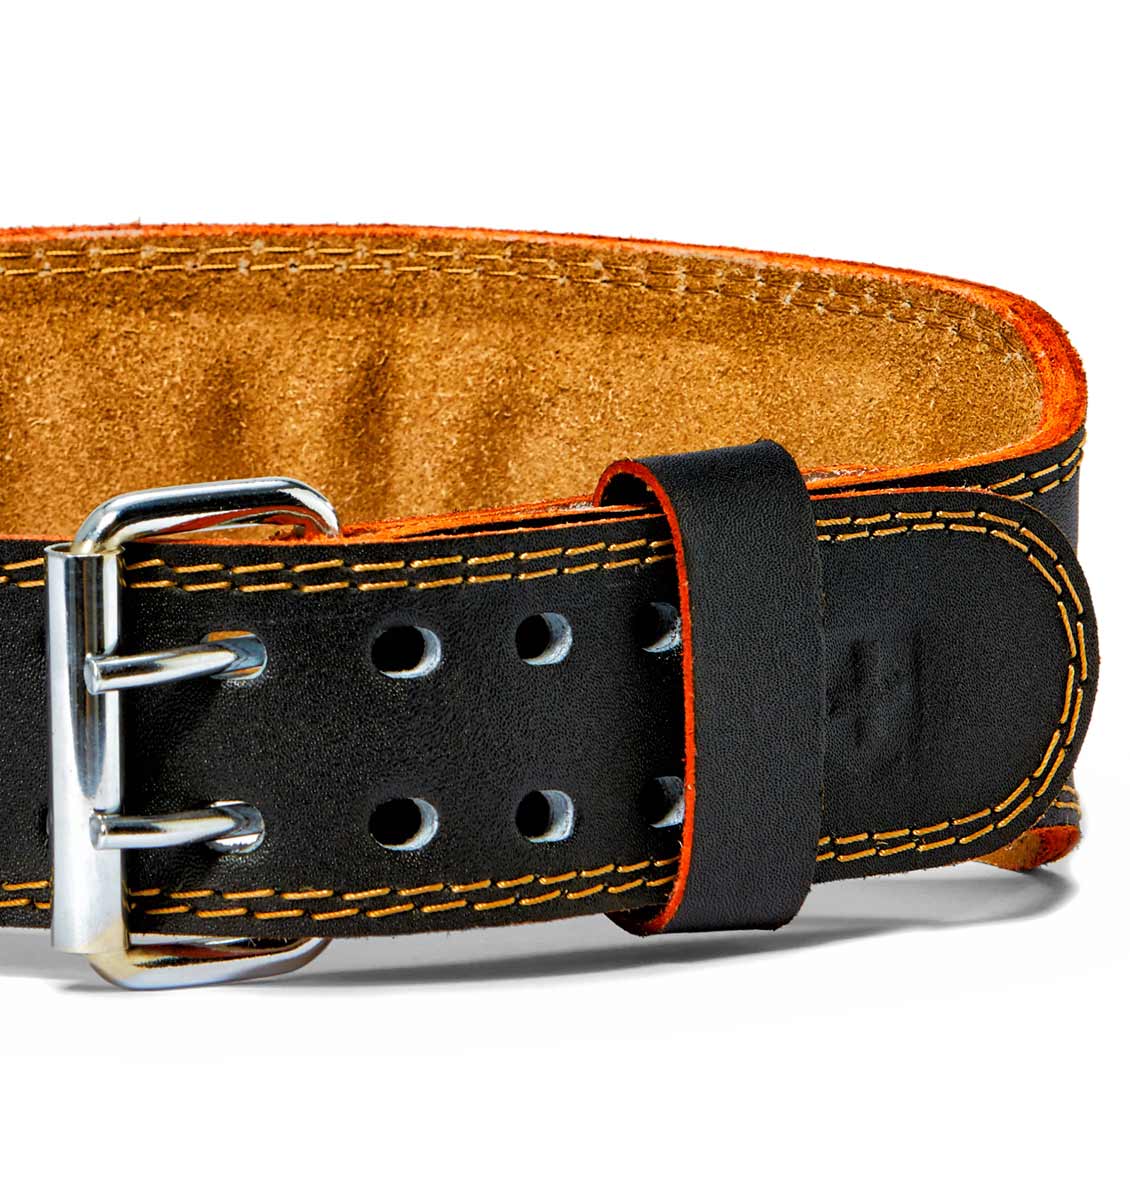 HAR284 Harbinger 4 inch Leather Weight Lifting Belt Front Close Up